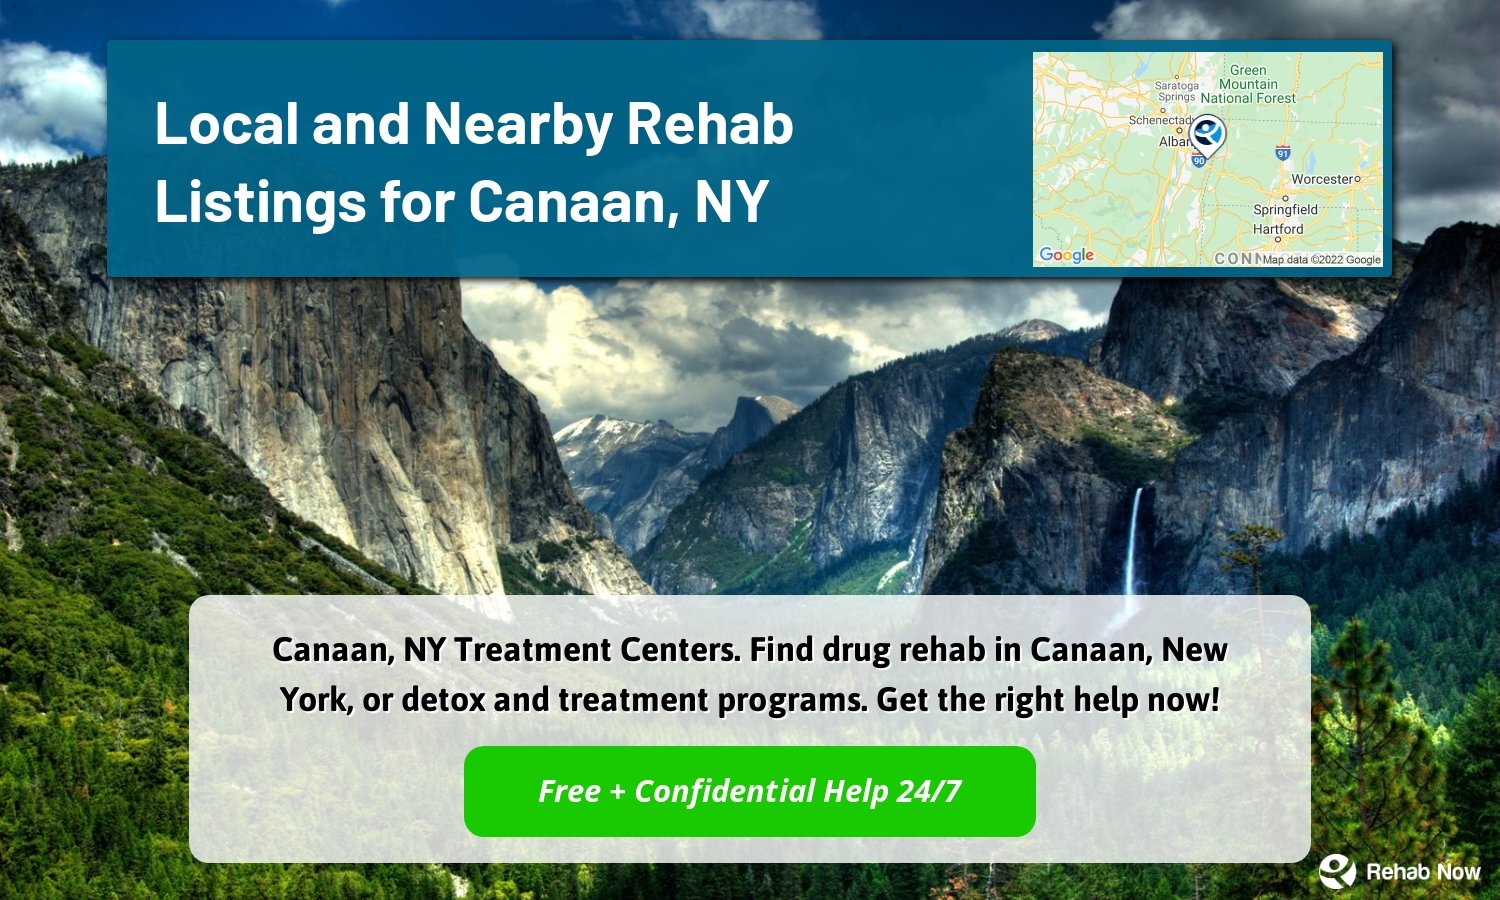 Canaan, NY Treatment Centers. Find drug rehab in Canaan, New York, or detox and treatment programs. Get the right help now!